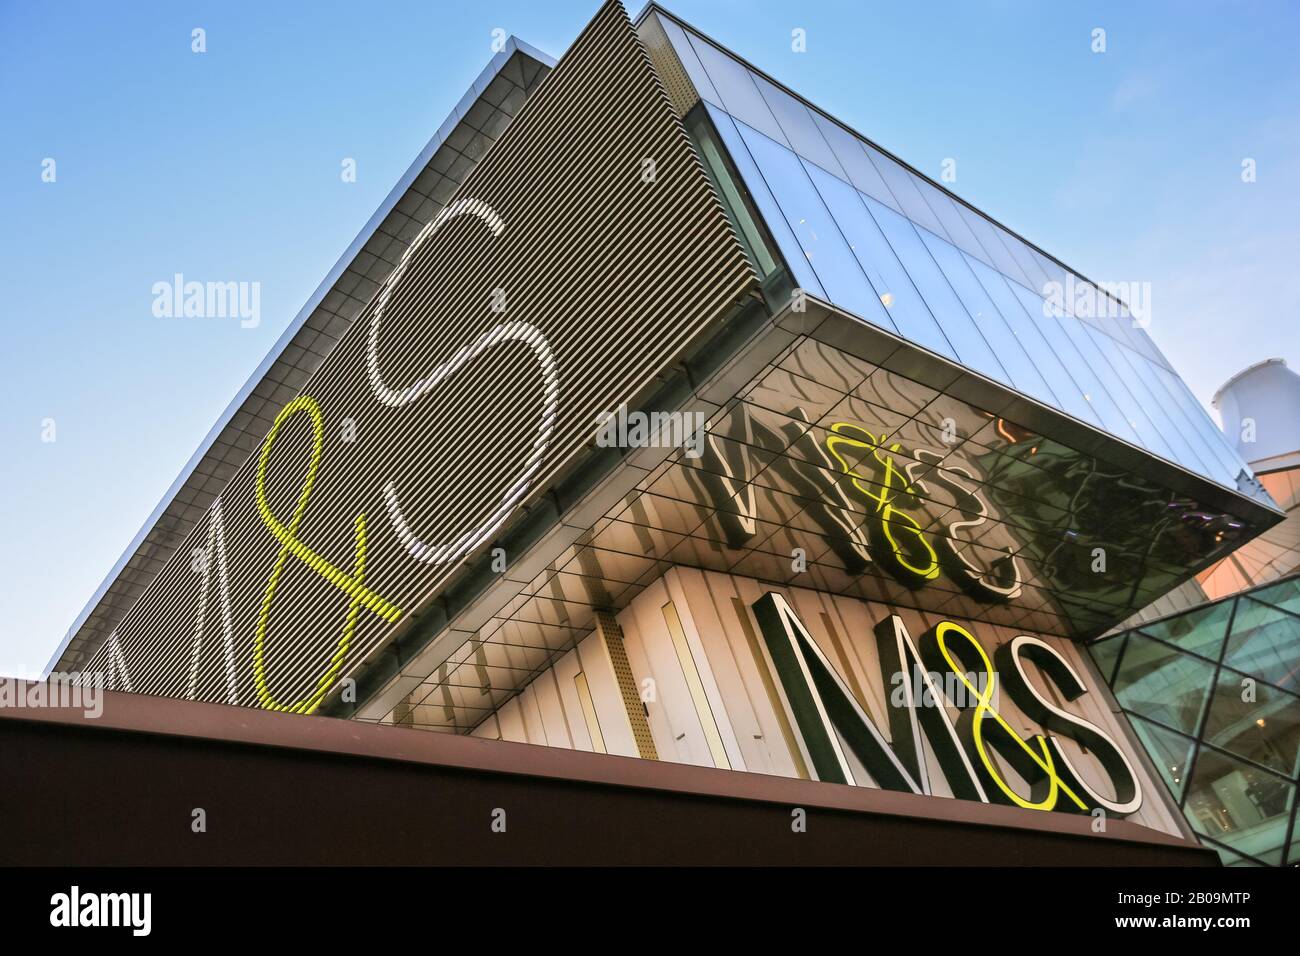 M&S, Marks & Spencer logo and exterior shop front, retail architecture at Westfield Stratford shopping centre, London, UK Stock Photo